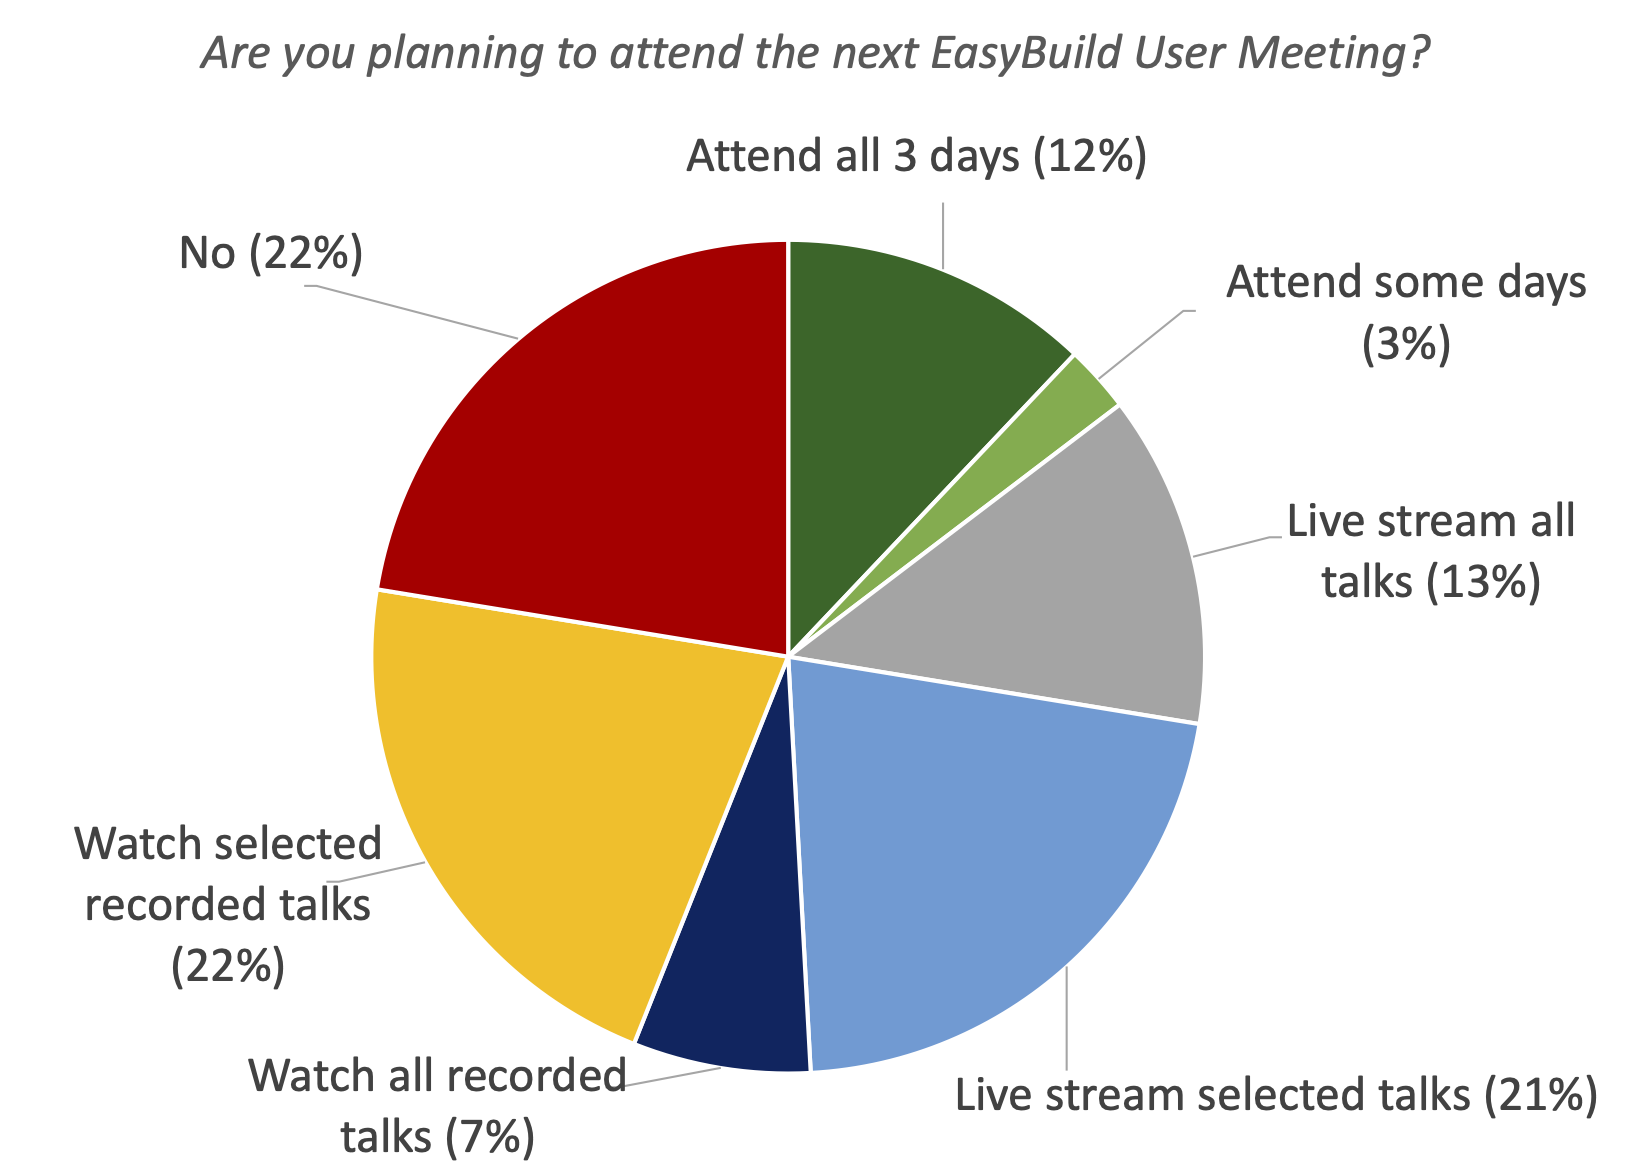 33. Are you planning to attend the next EasyBuild User Meeting?